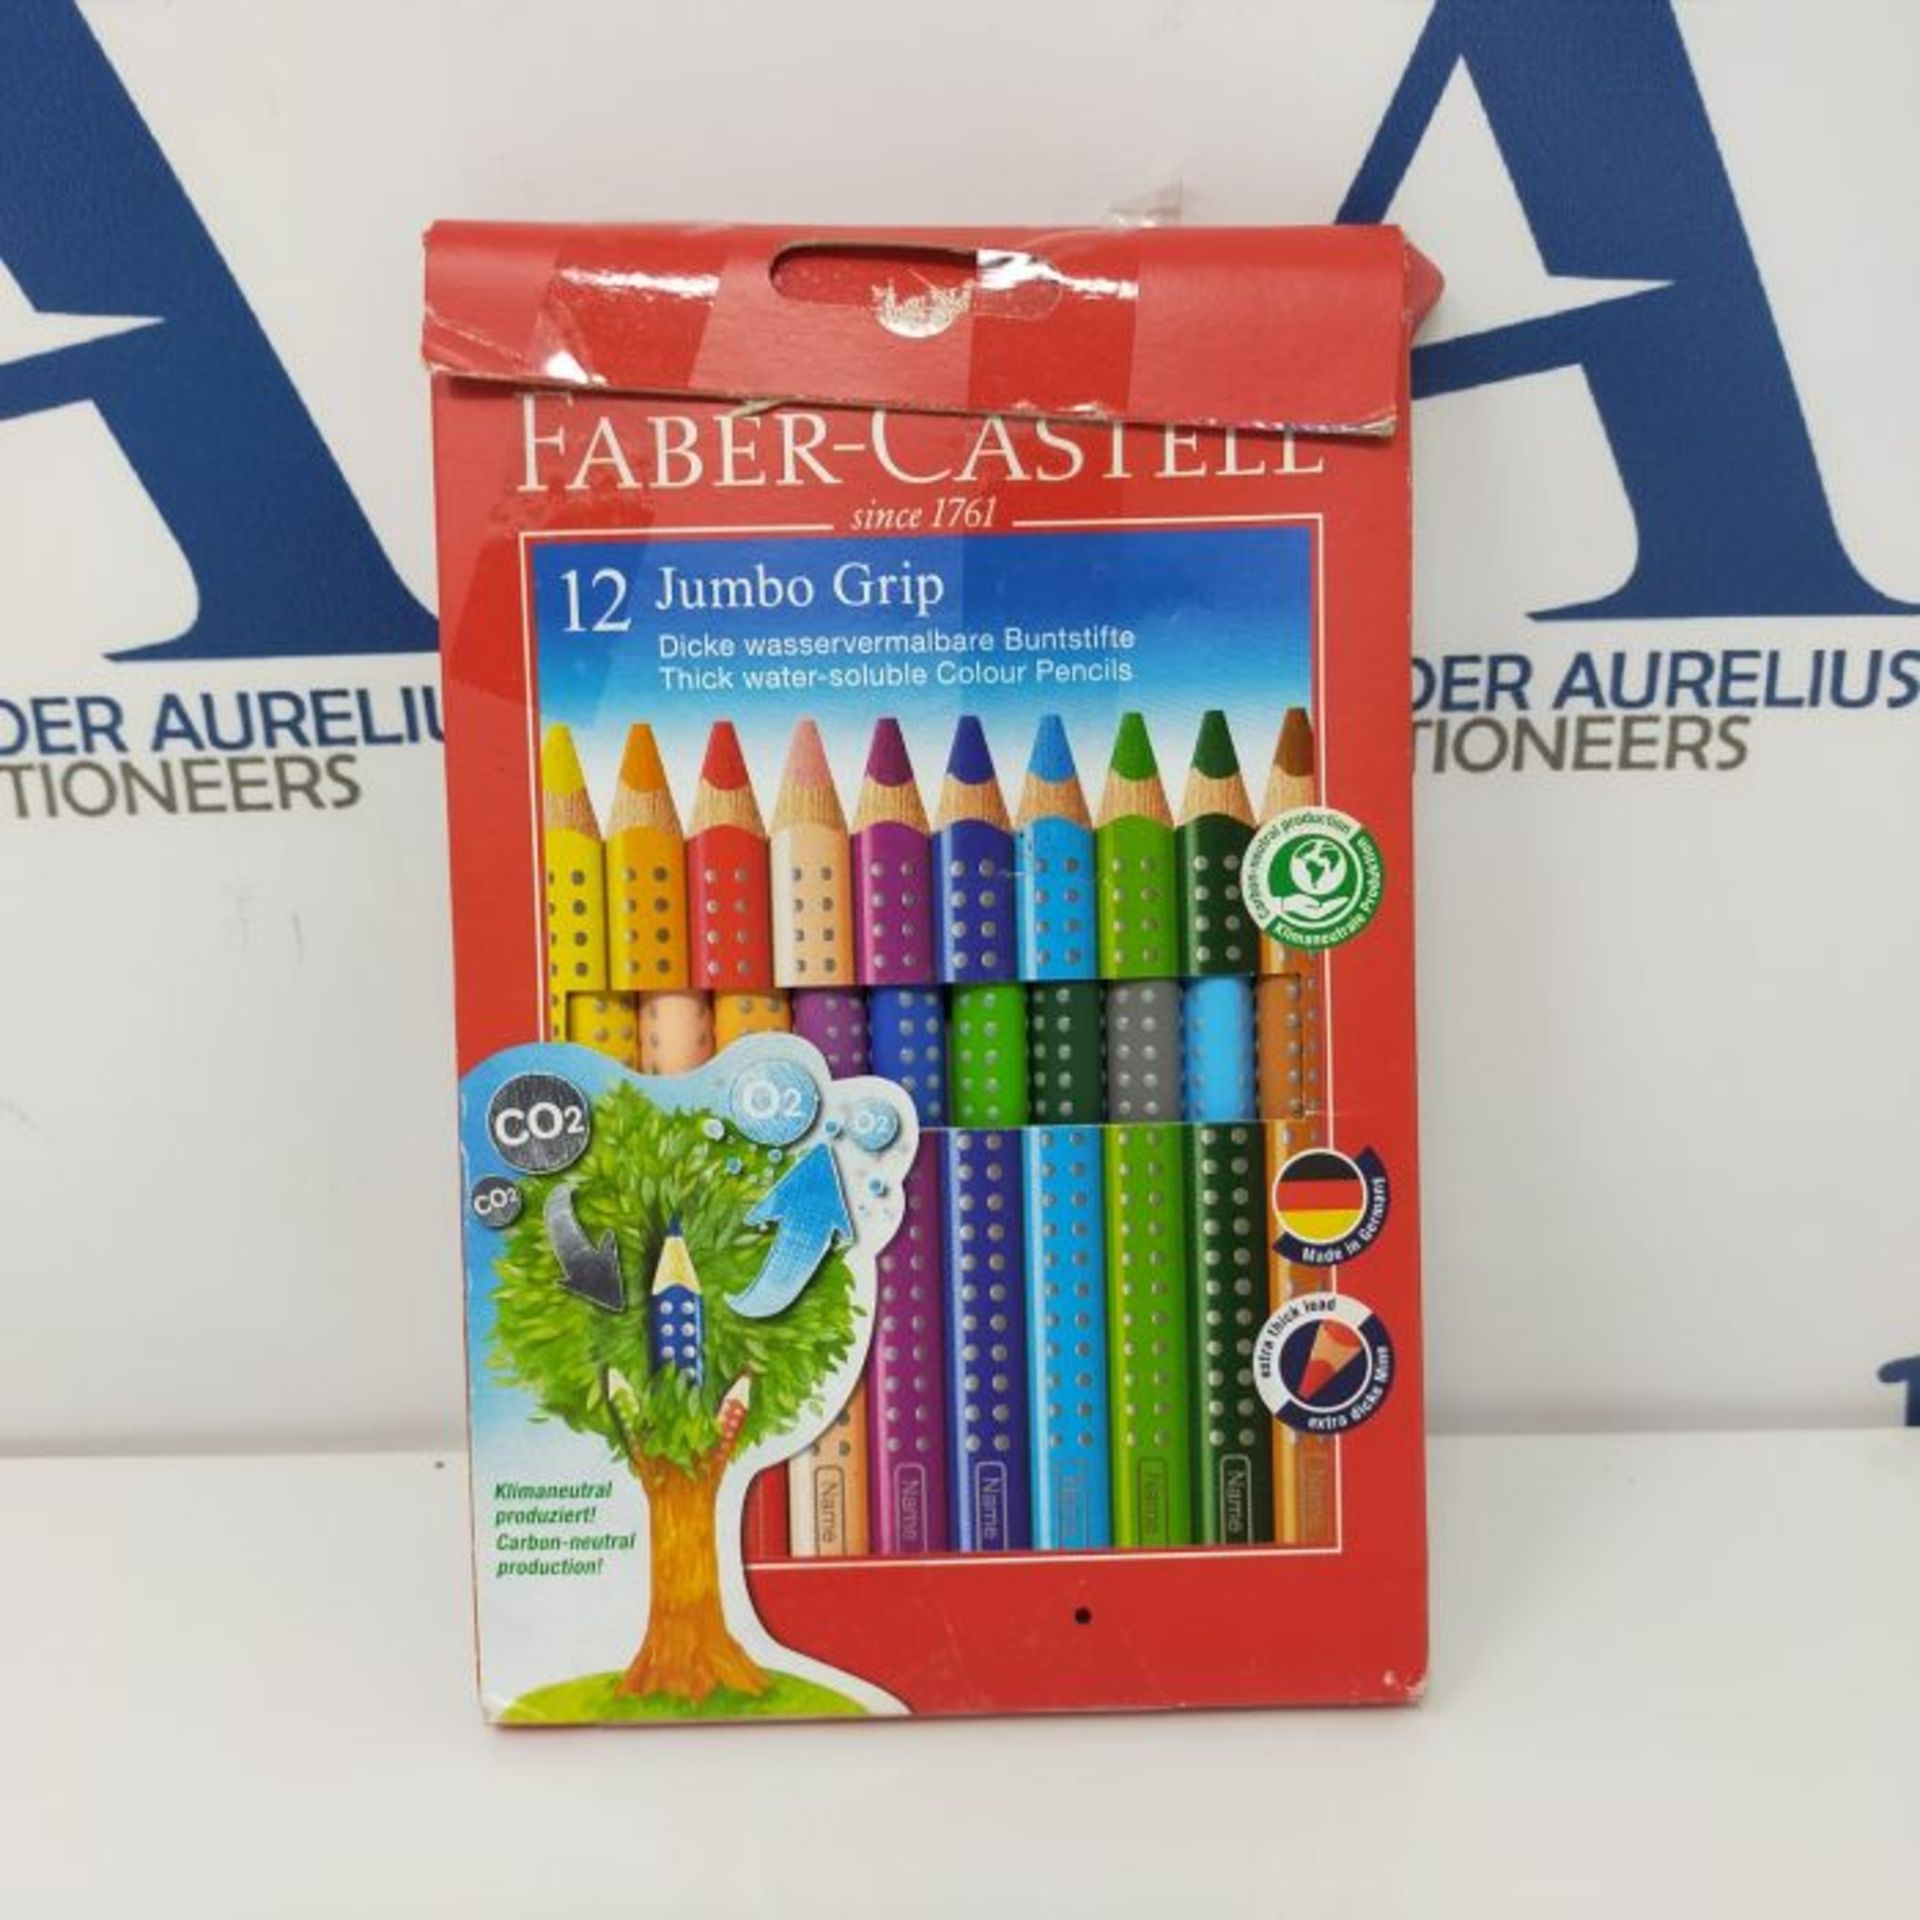 Faber-Castell 110912 - Jumbo GRIP colored pencils, box of 12, packaging may vary - Image 2 of 2